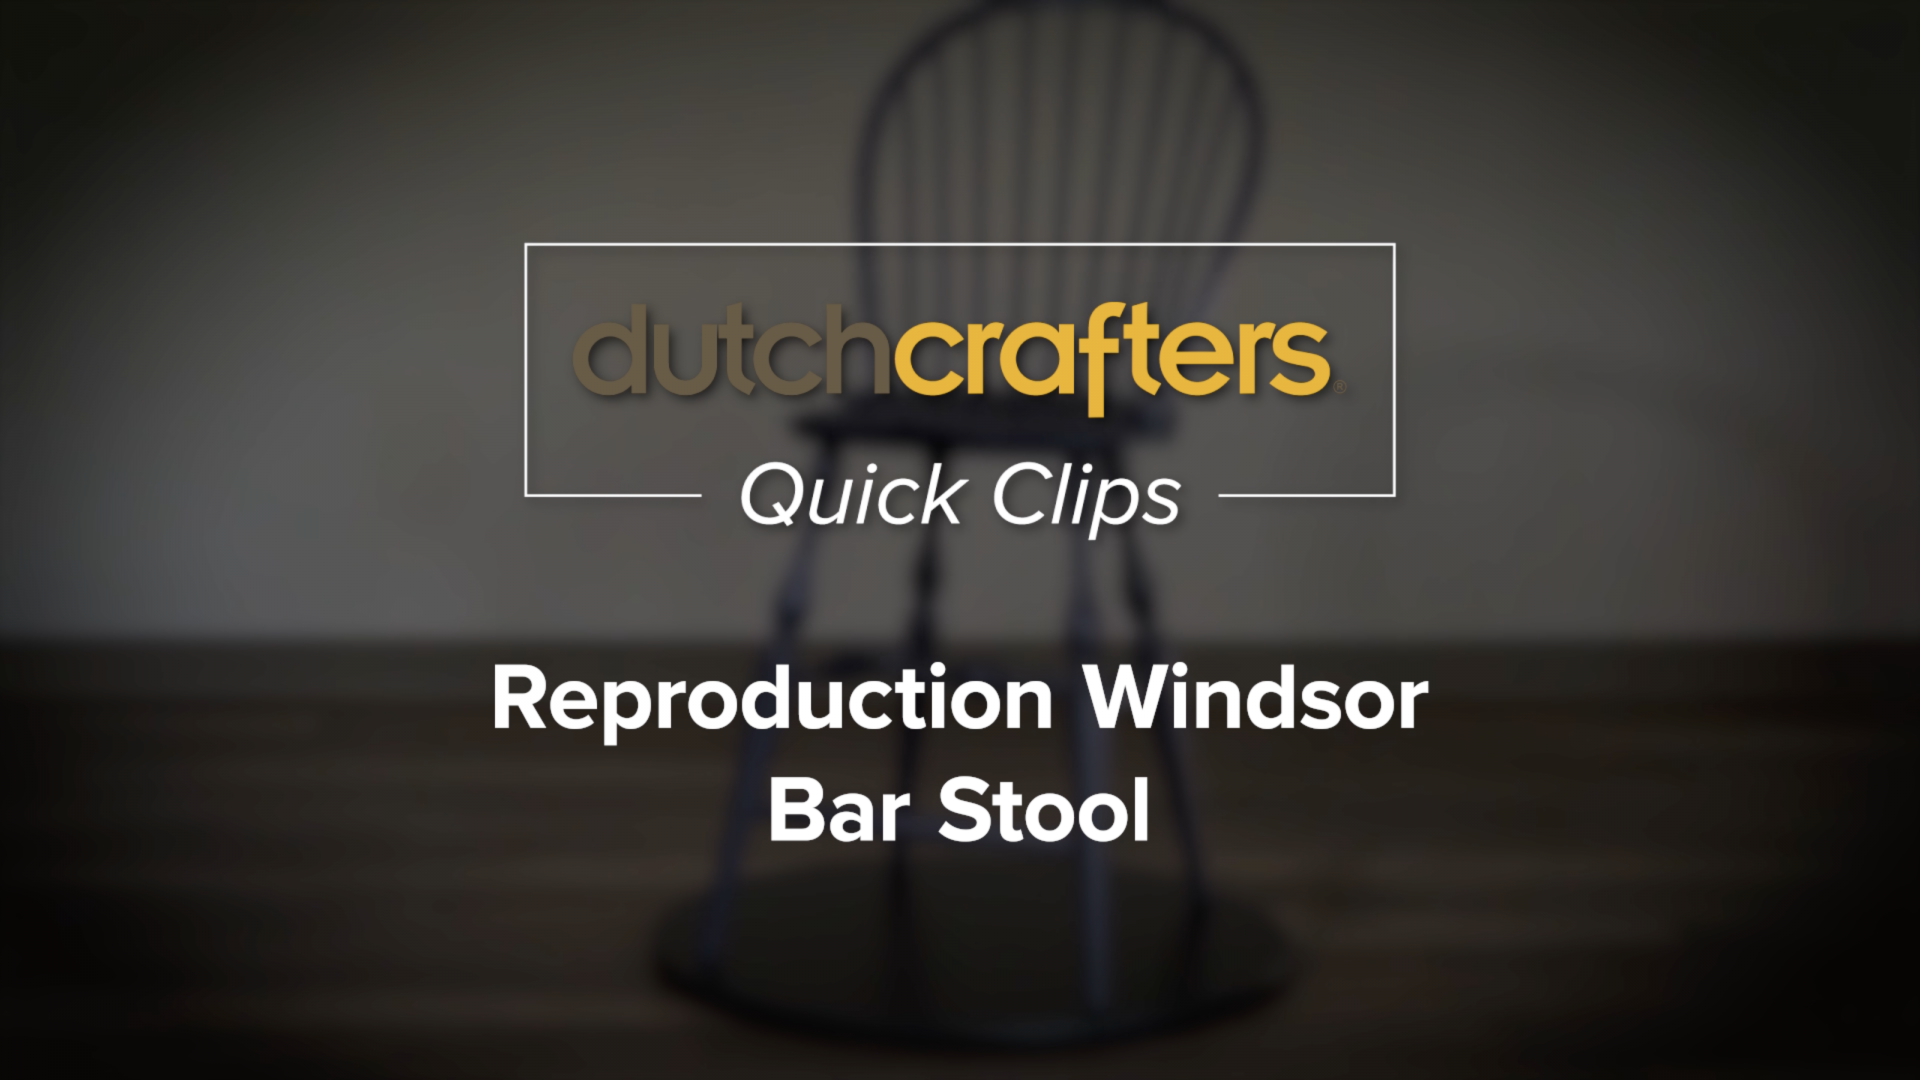 DutchCrafters Quick Clips: Reproduction Windsor Bar Stool